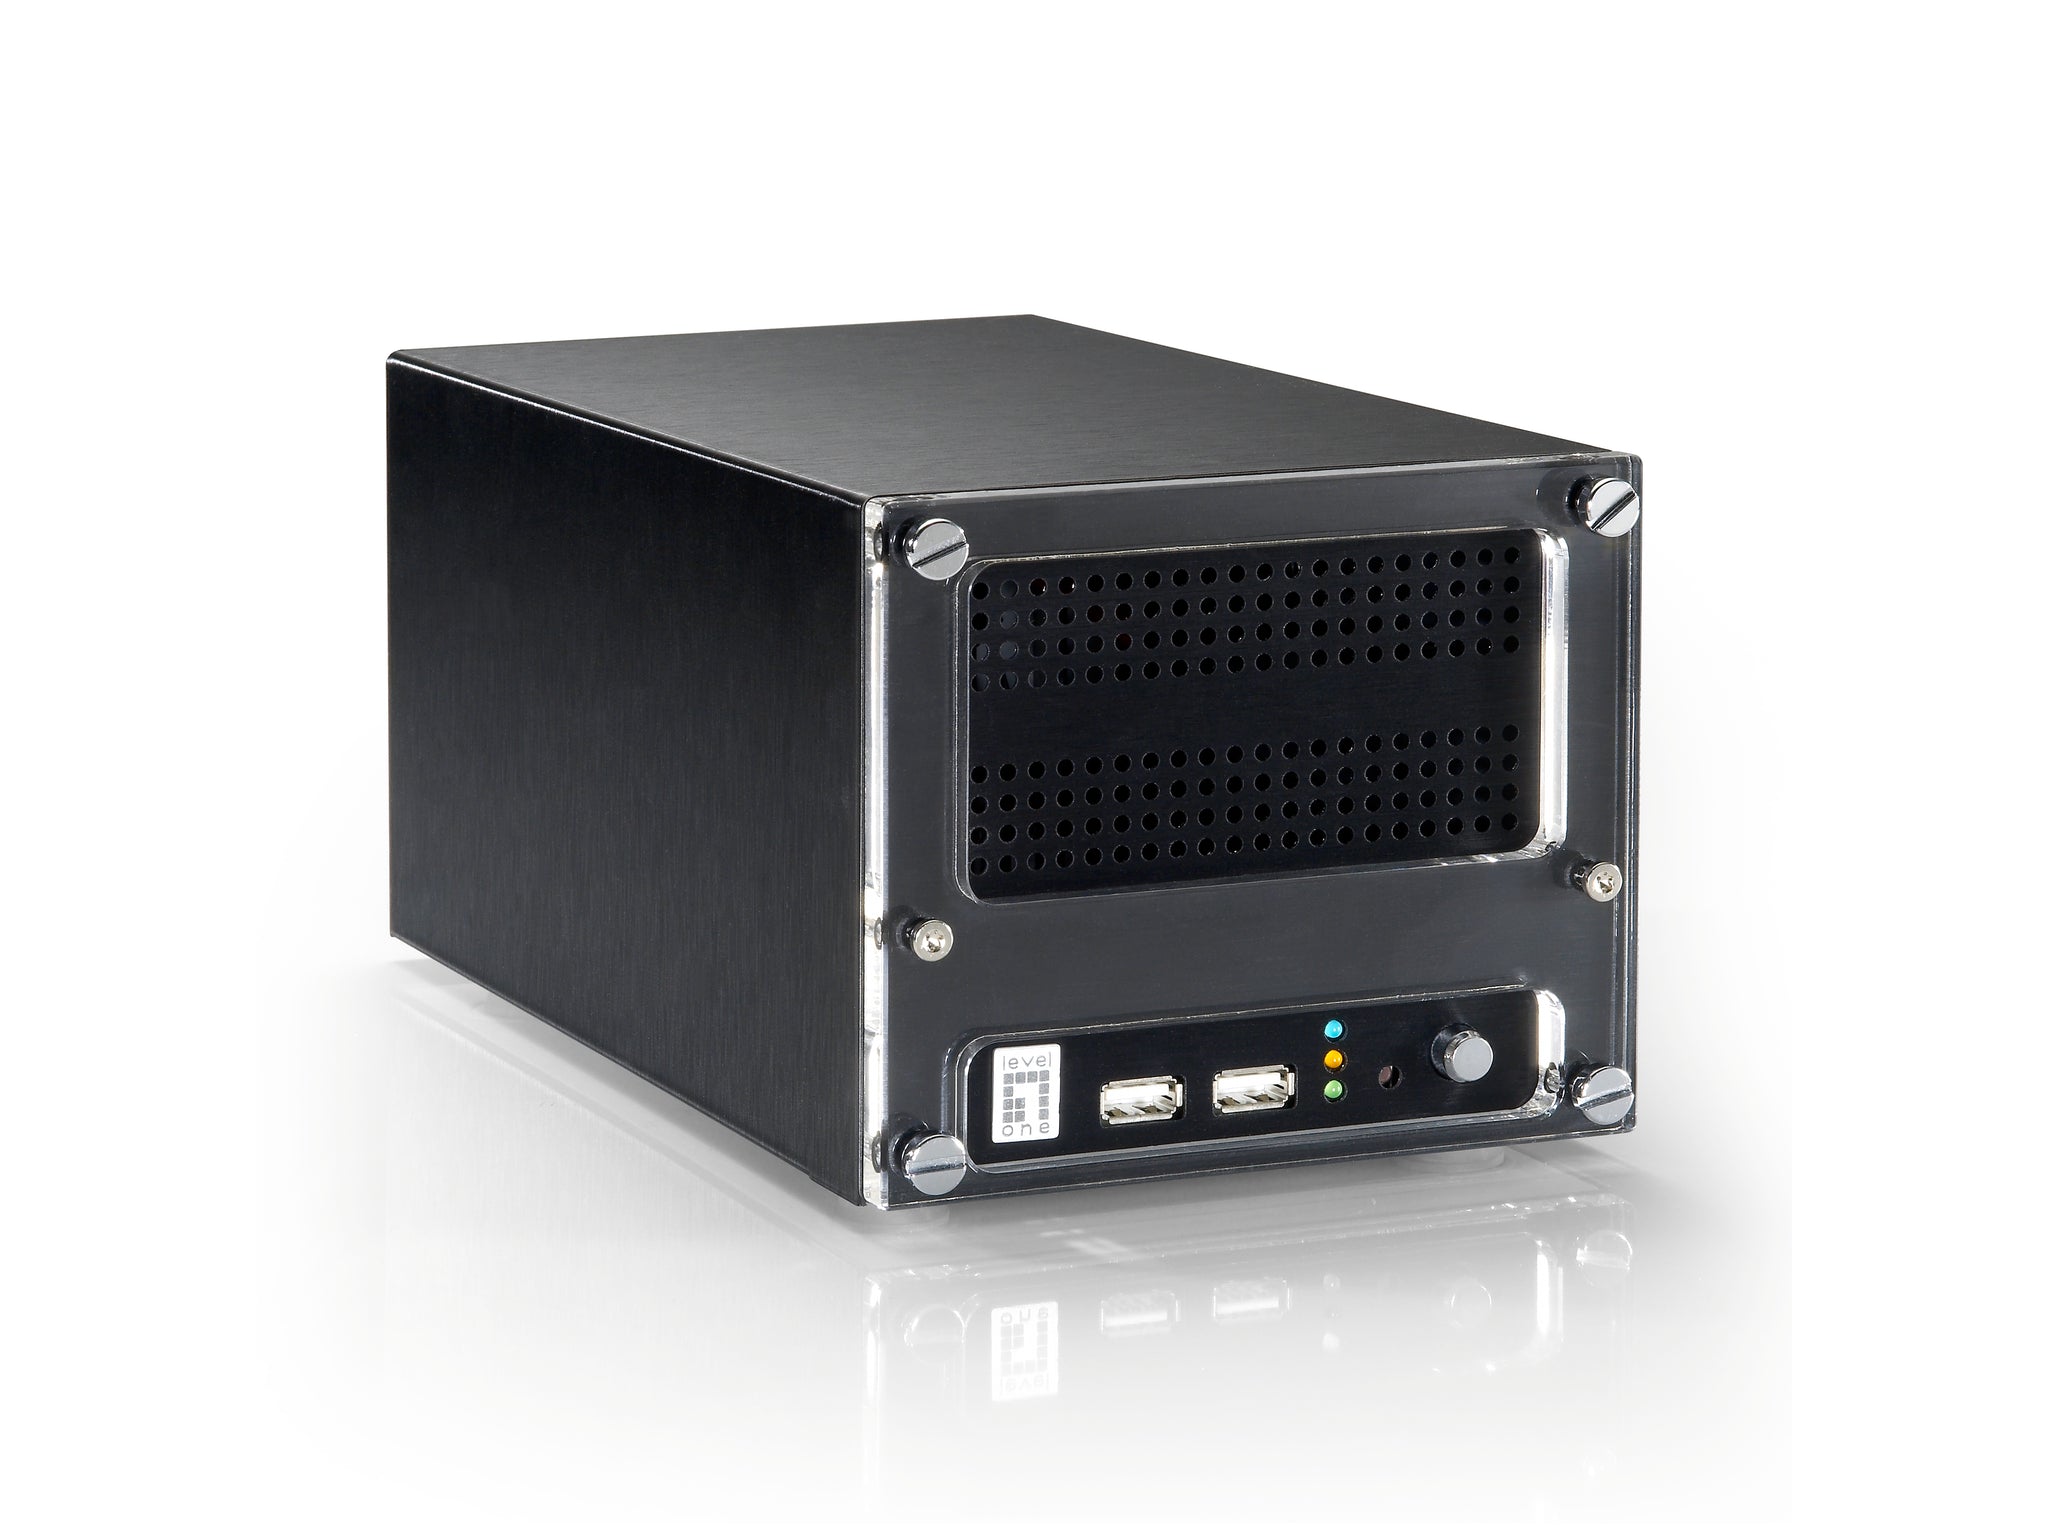 NVR-1209 9-Channel Network Video Recorder